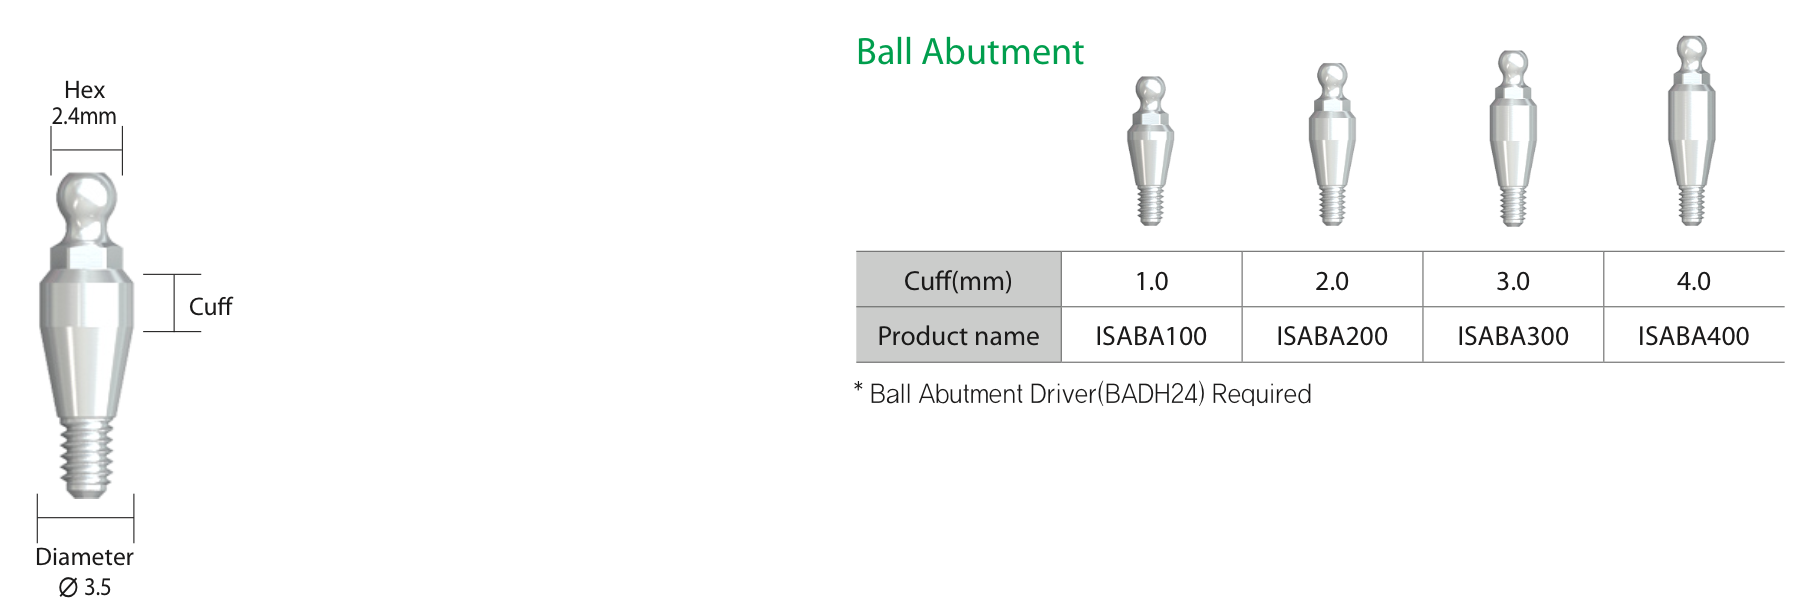 IS Ball Abutment